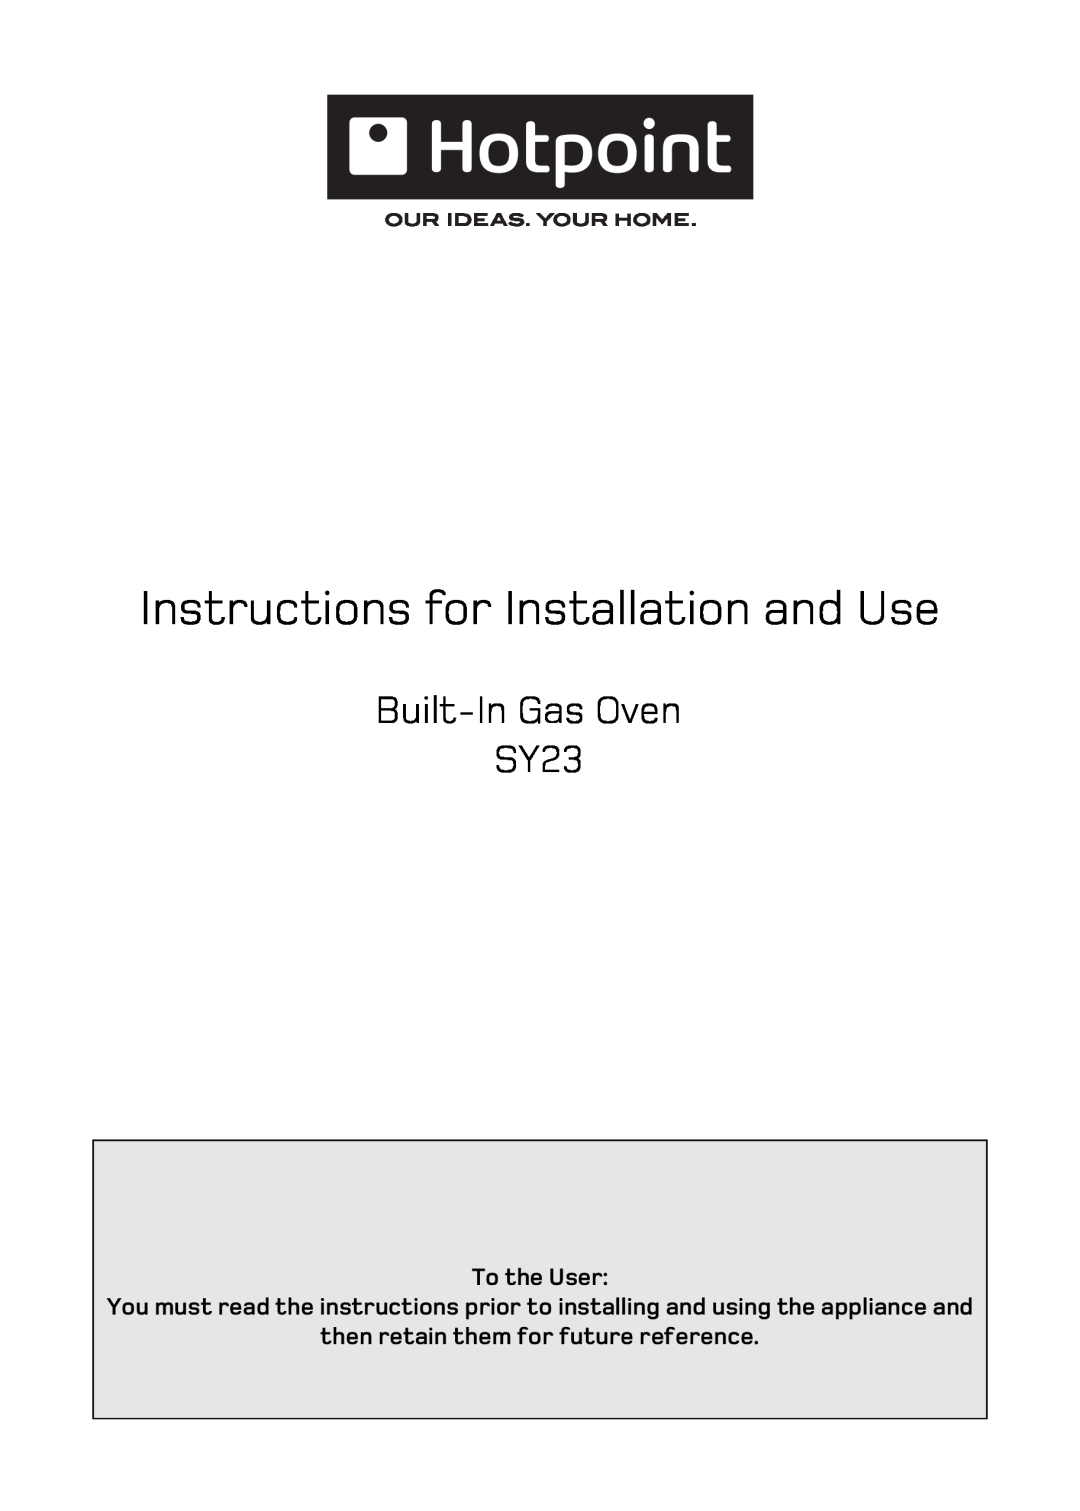 Hotpoint manual Instructions for Installation and Use, Built-InGas Oven SY23, To the User 